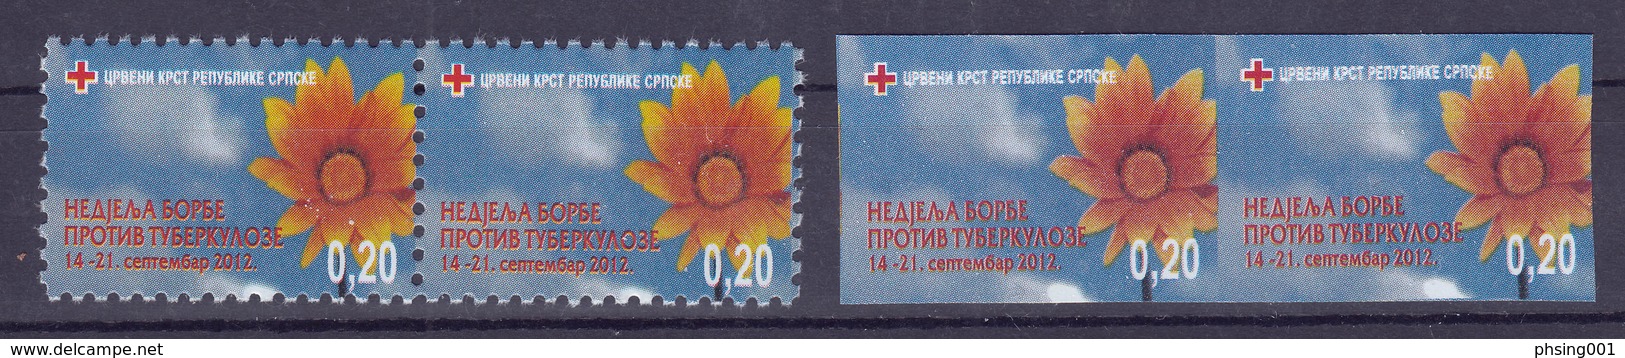 Bosnia Serbia 2012 TBC Red Cross Croix Rouge Rotes Kreuz Flower Tax Charity Perforated+imperforated Stamps In Pair MNH - Bosnien-Herzegowina